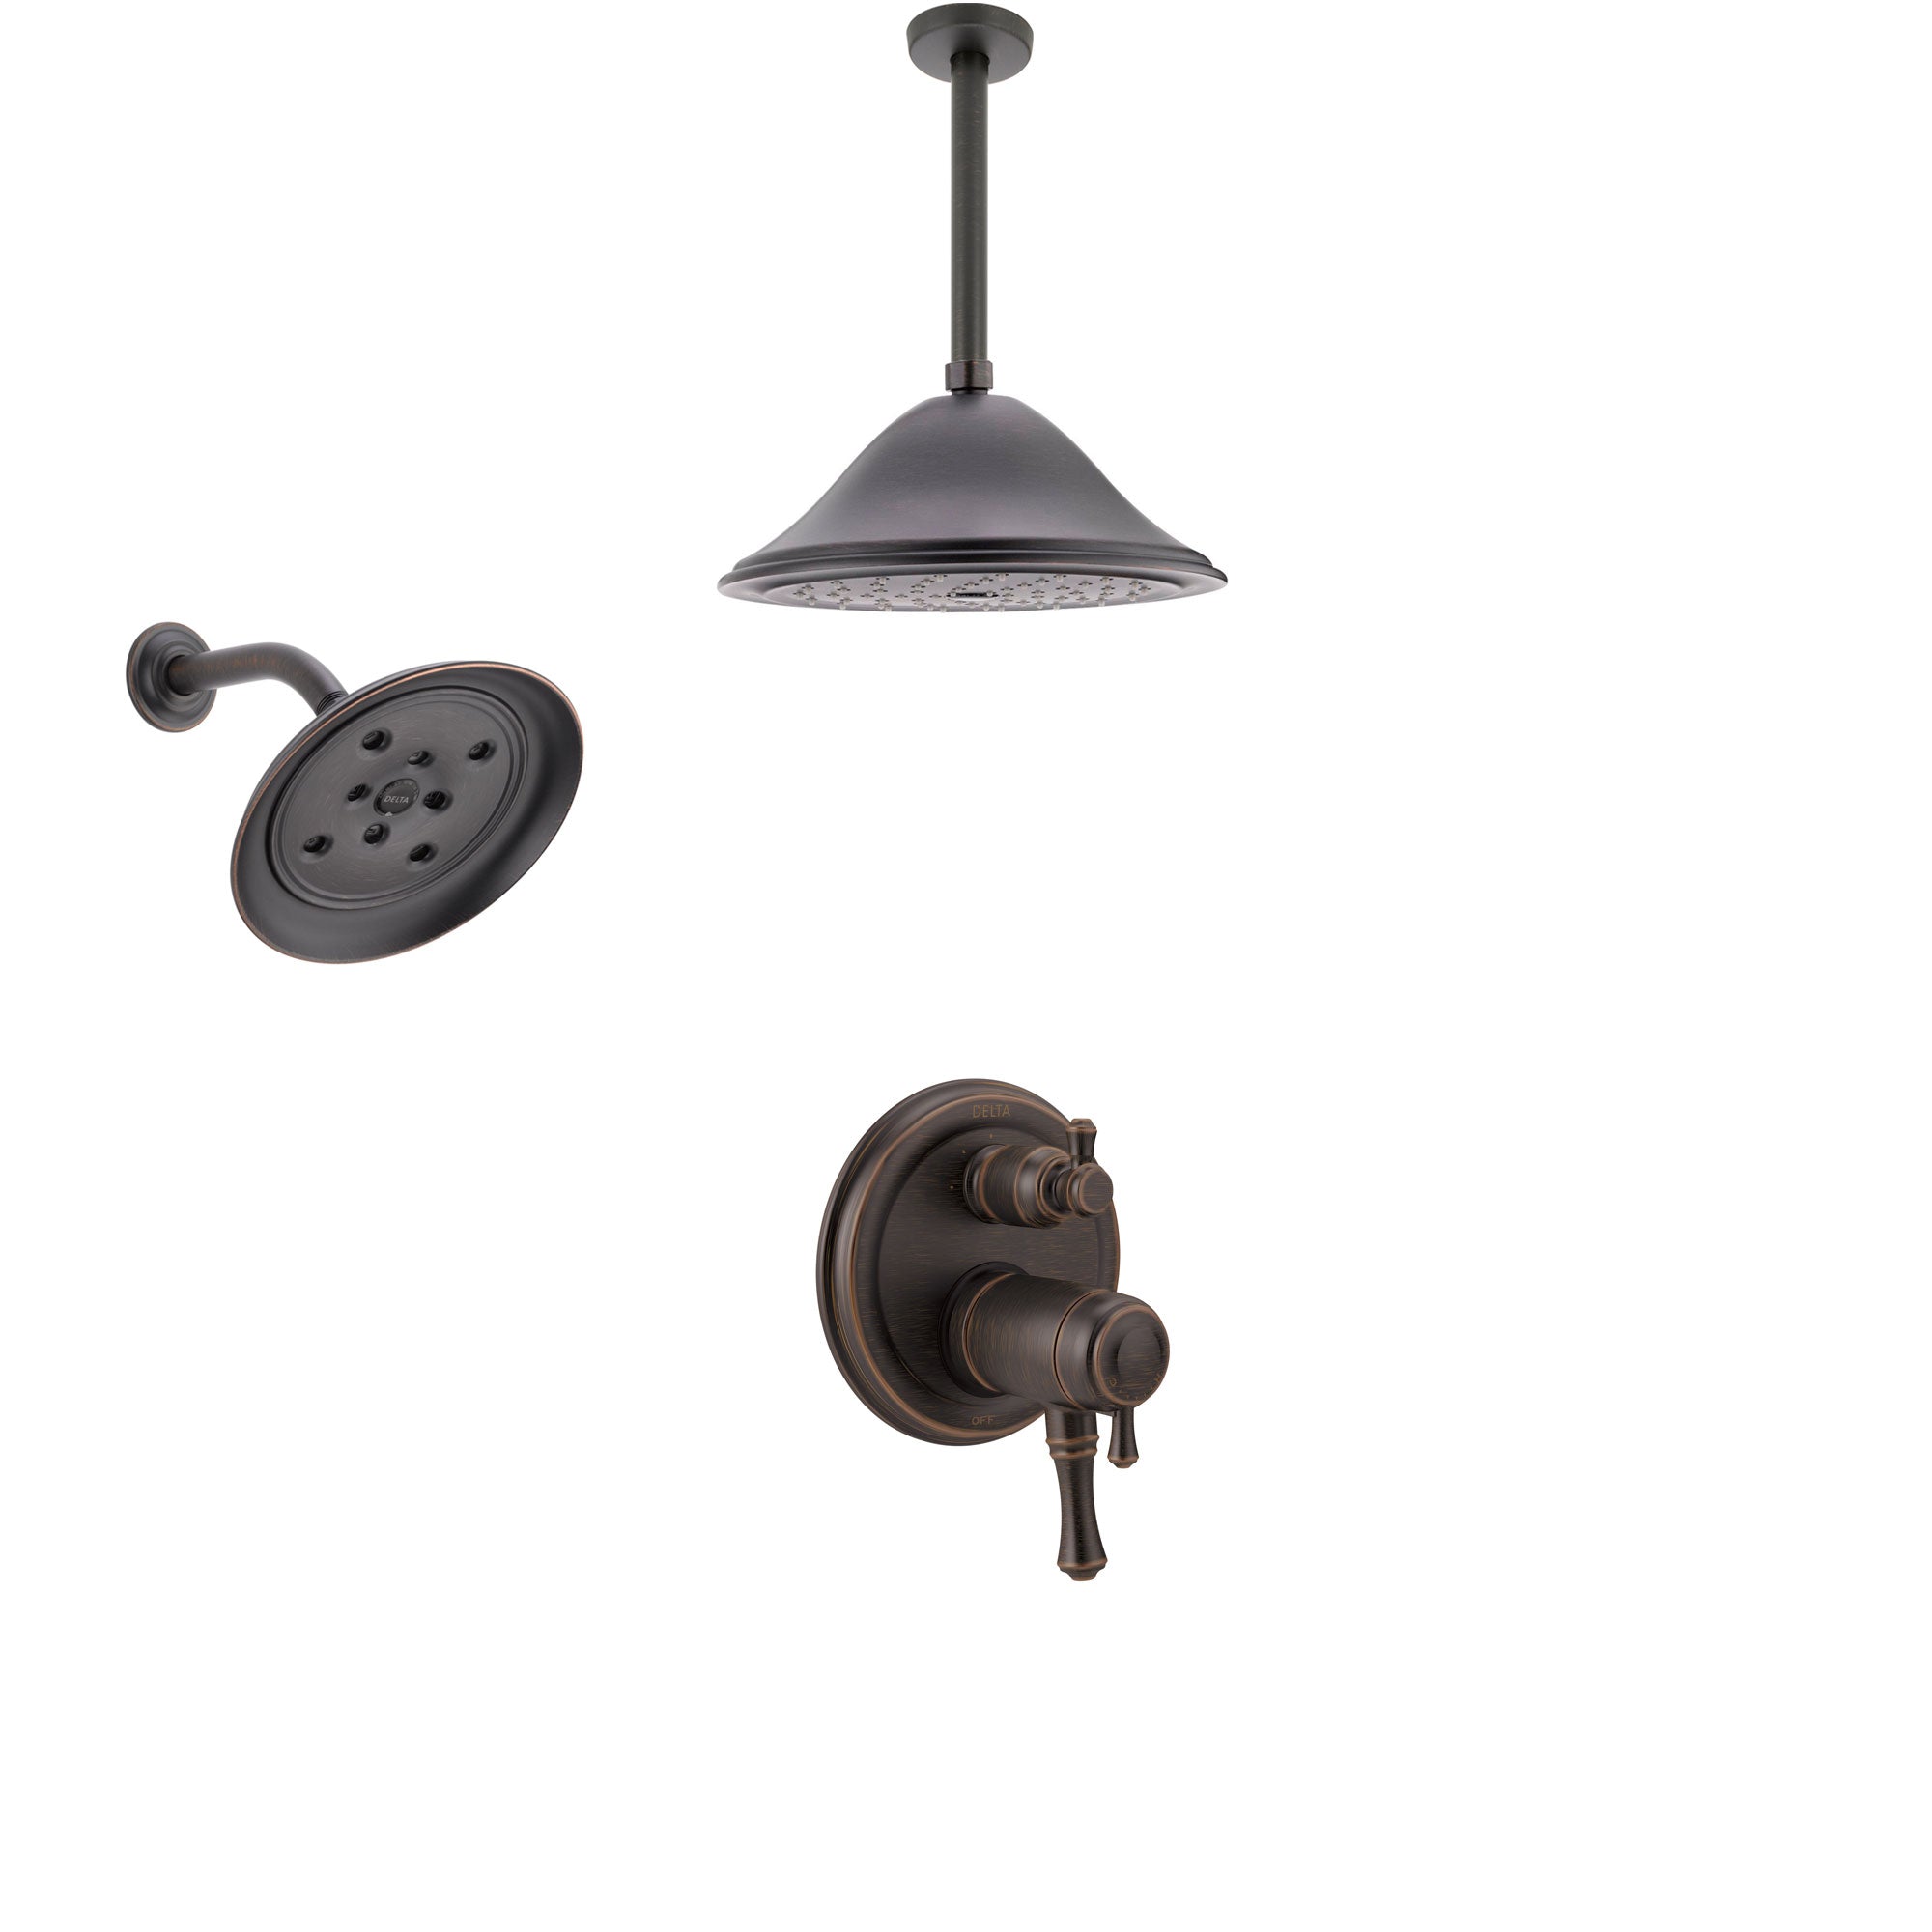 Delta Cassidy Venetian Bronze Integrated Diverter Shower System with Dual Thermostatic Control, Showerhead, and Ceiling Mount Showerhead SS27T897RB2